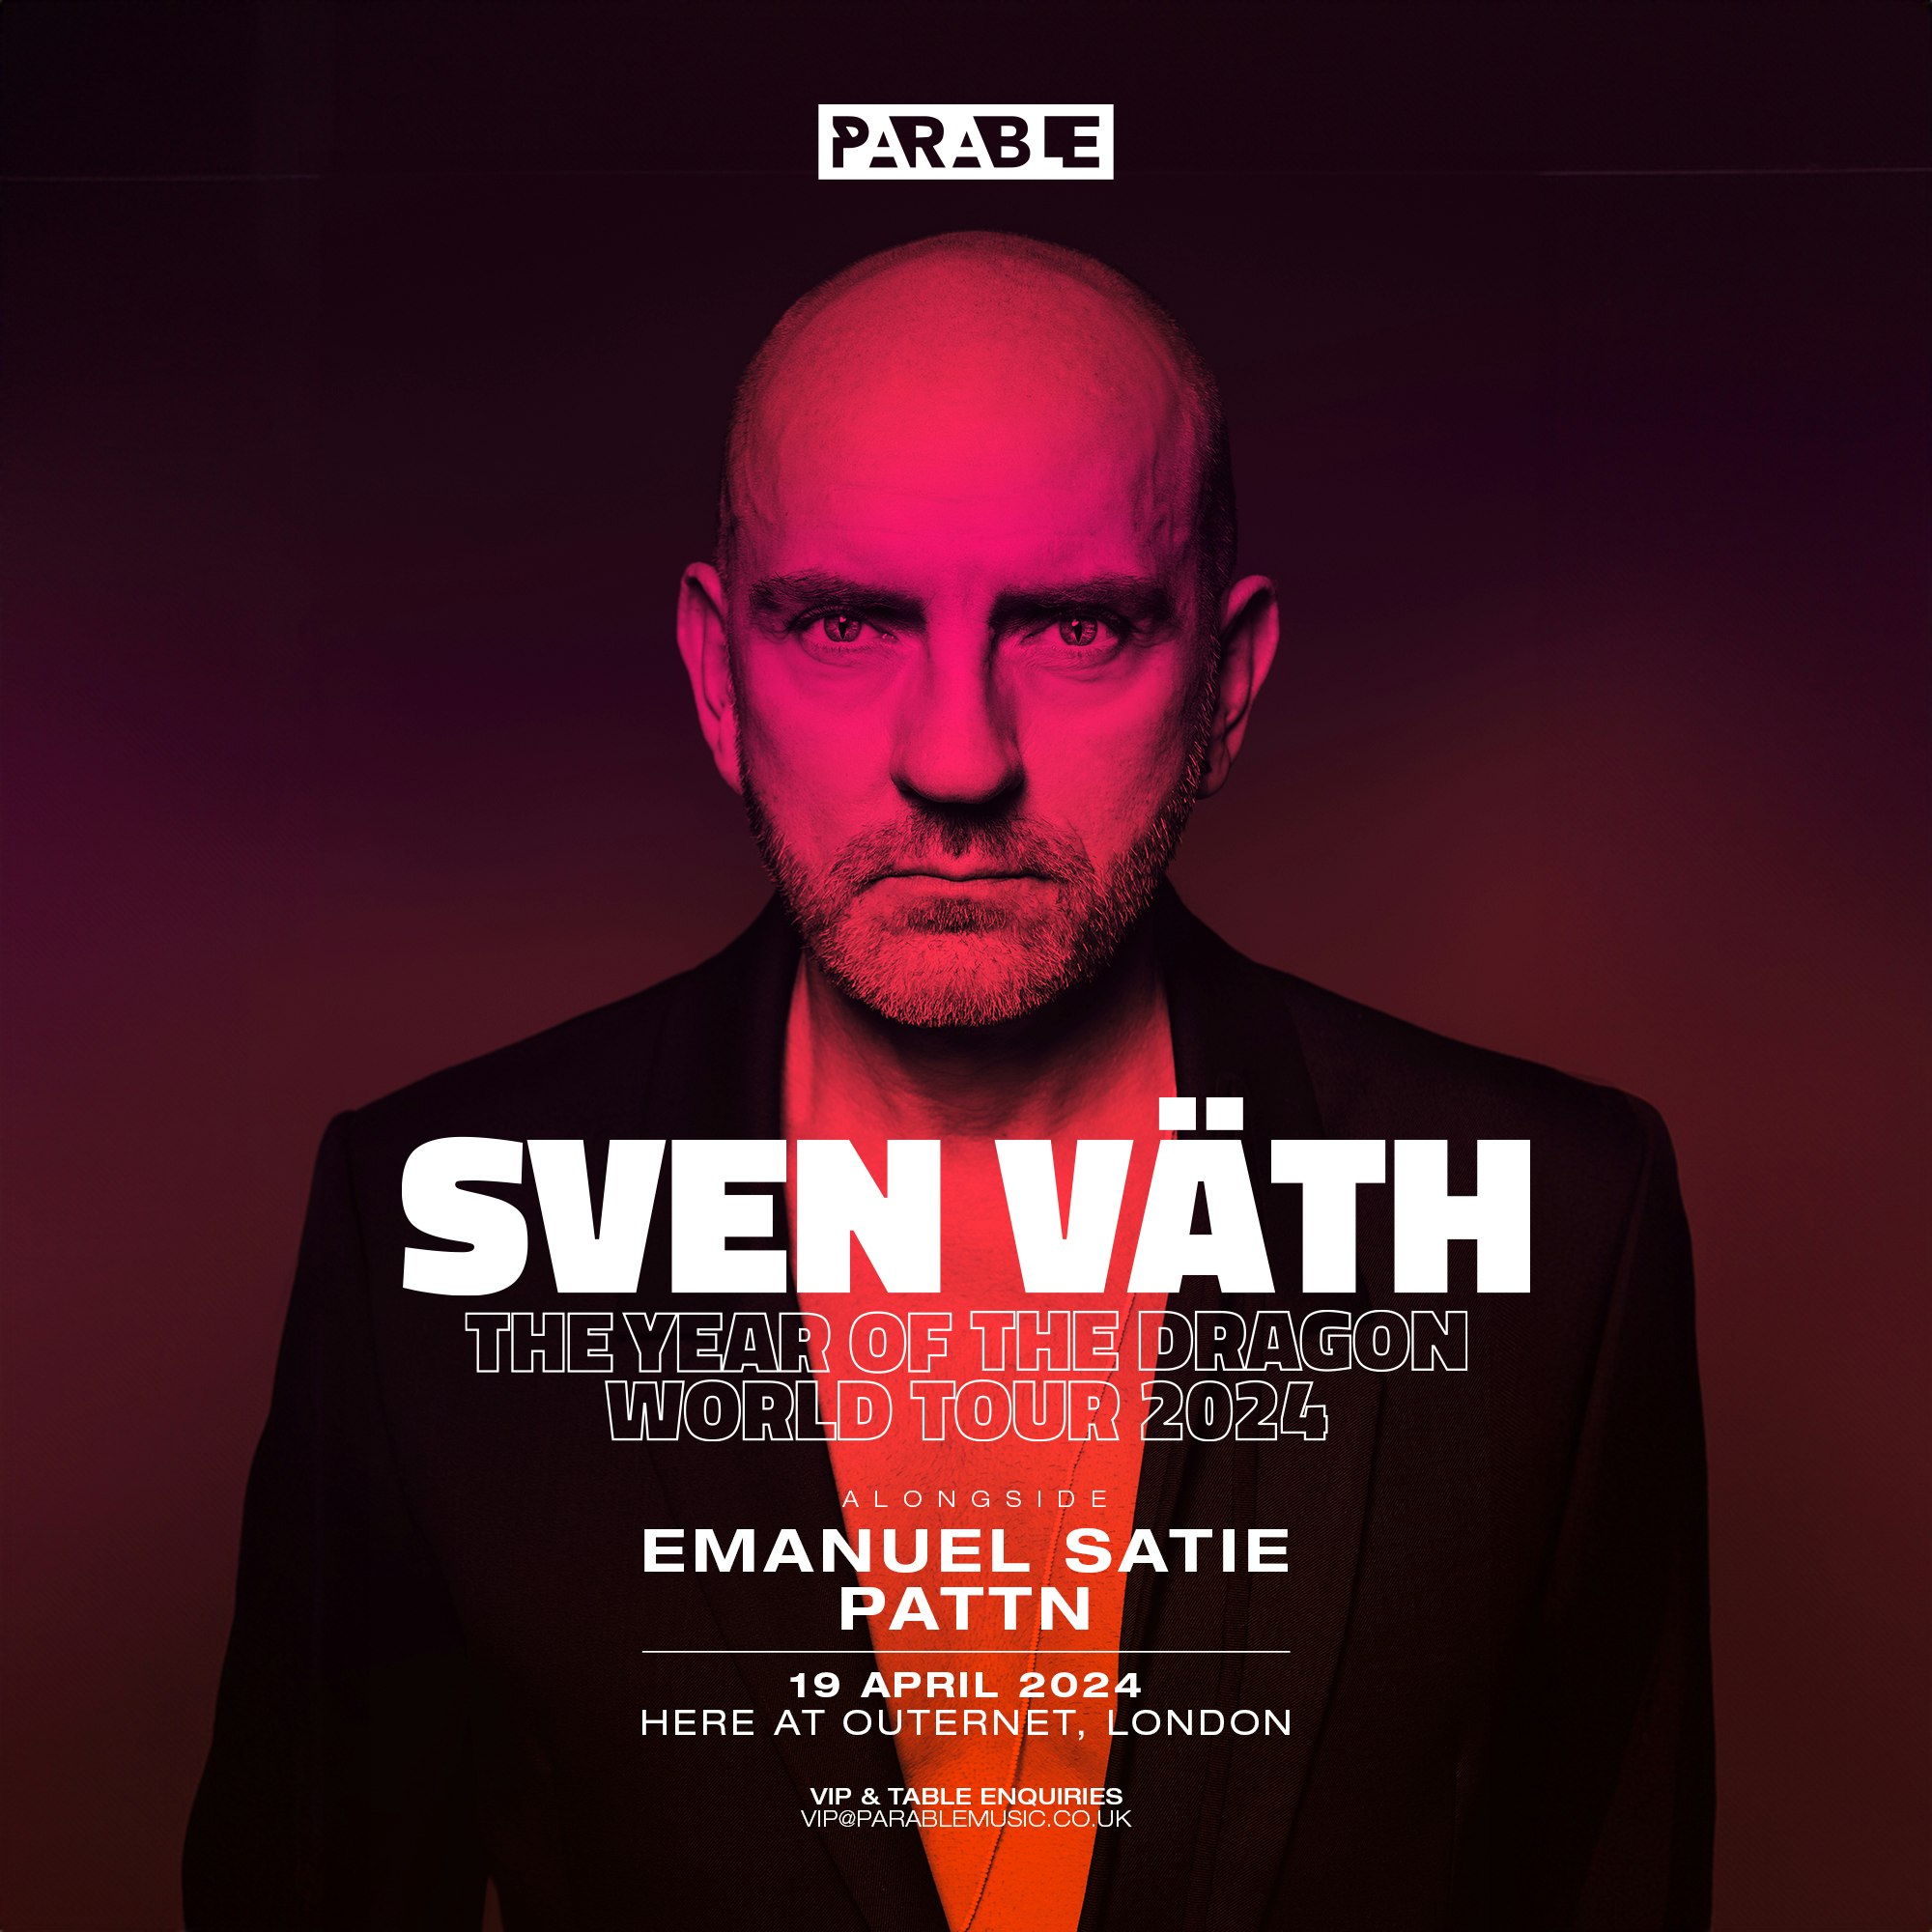 Parable presents: Sven Vath at HERE at Outernet